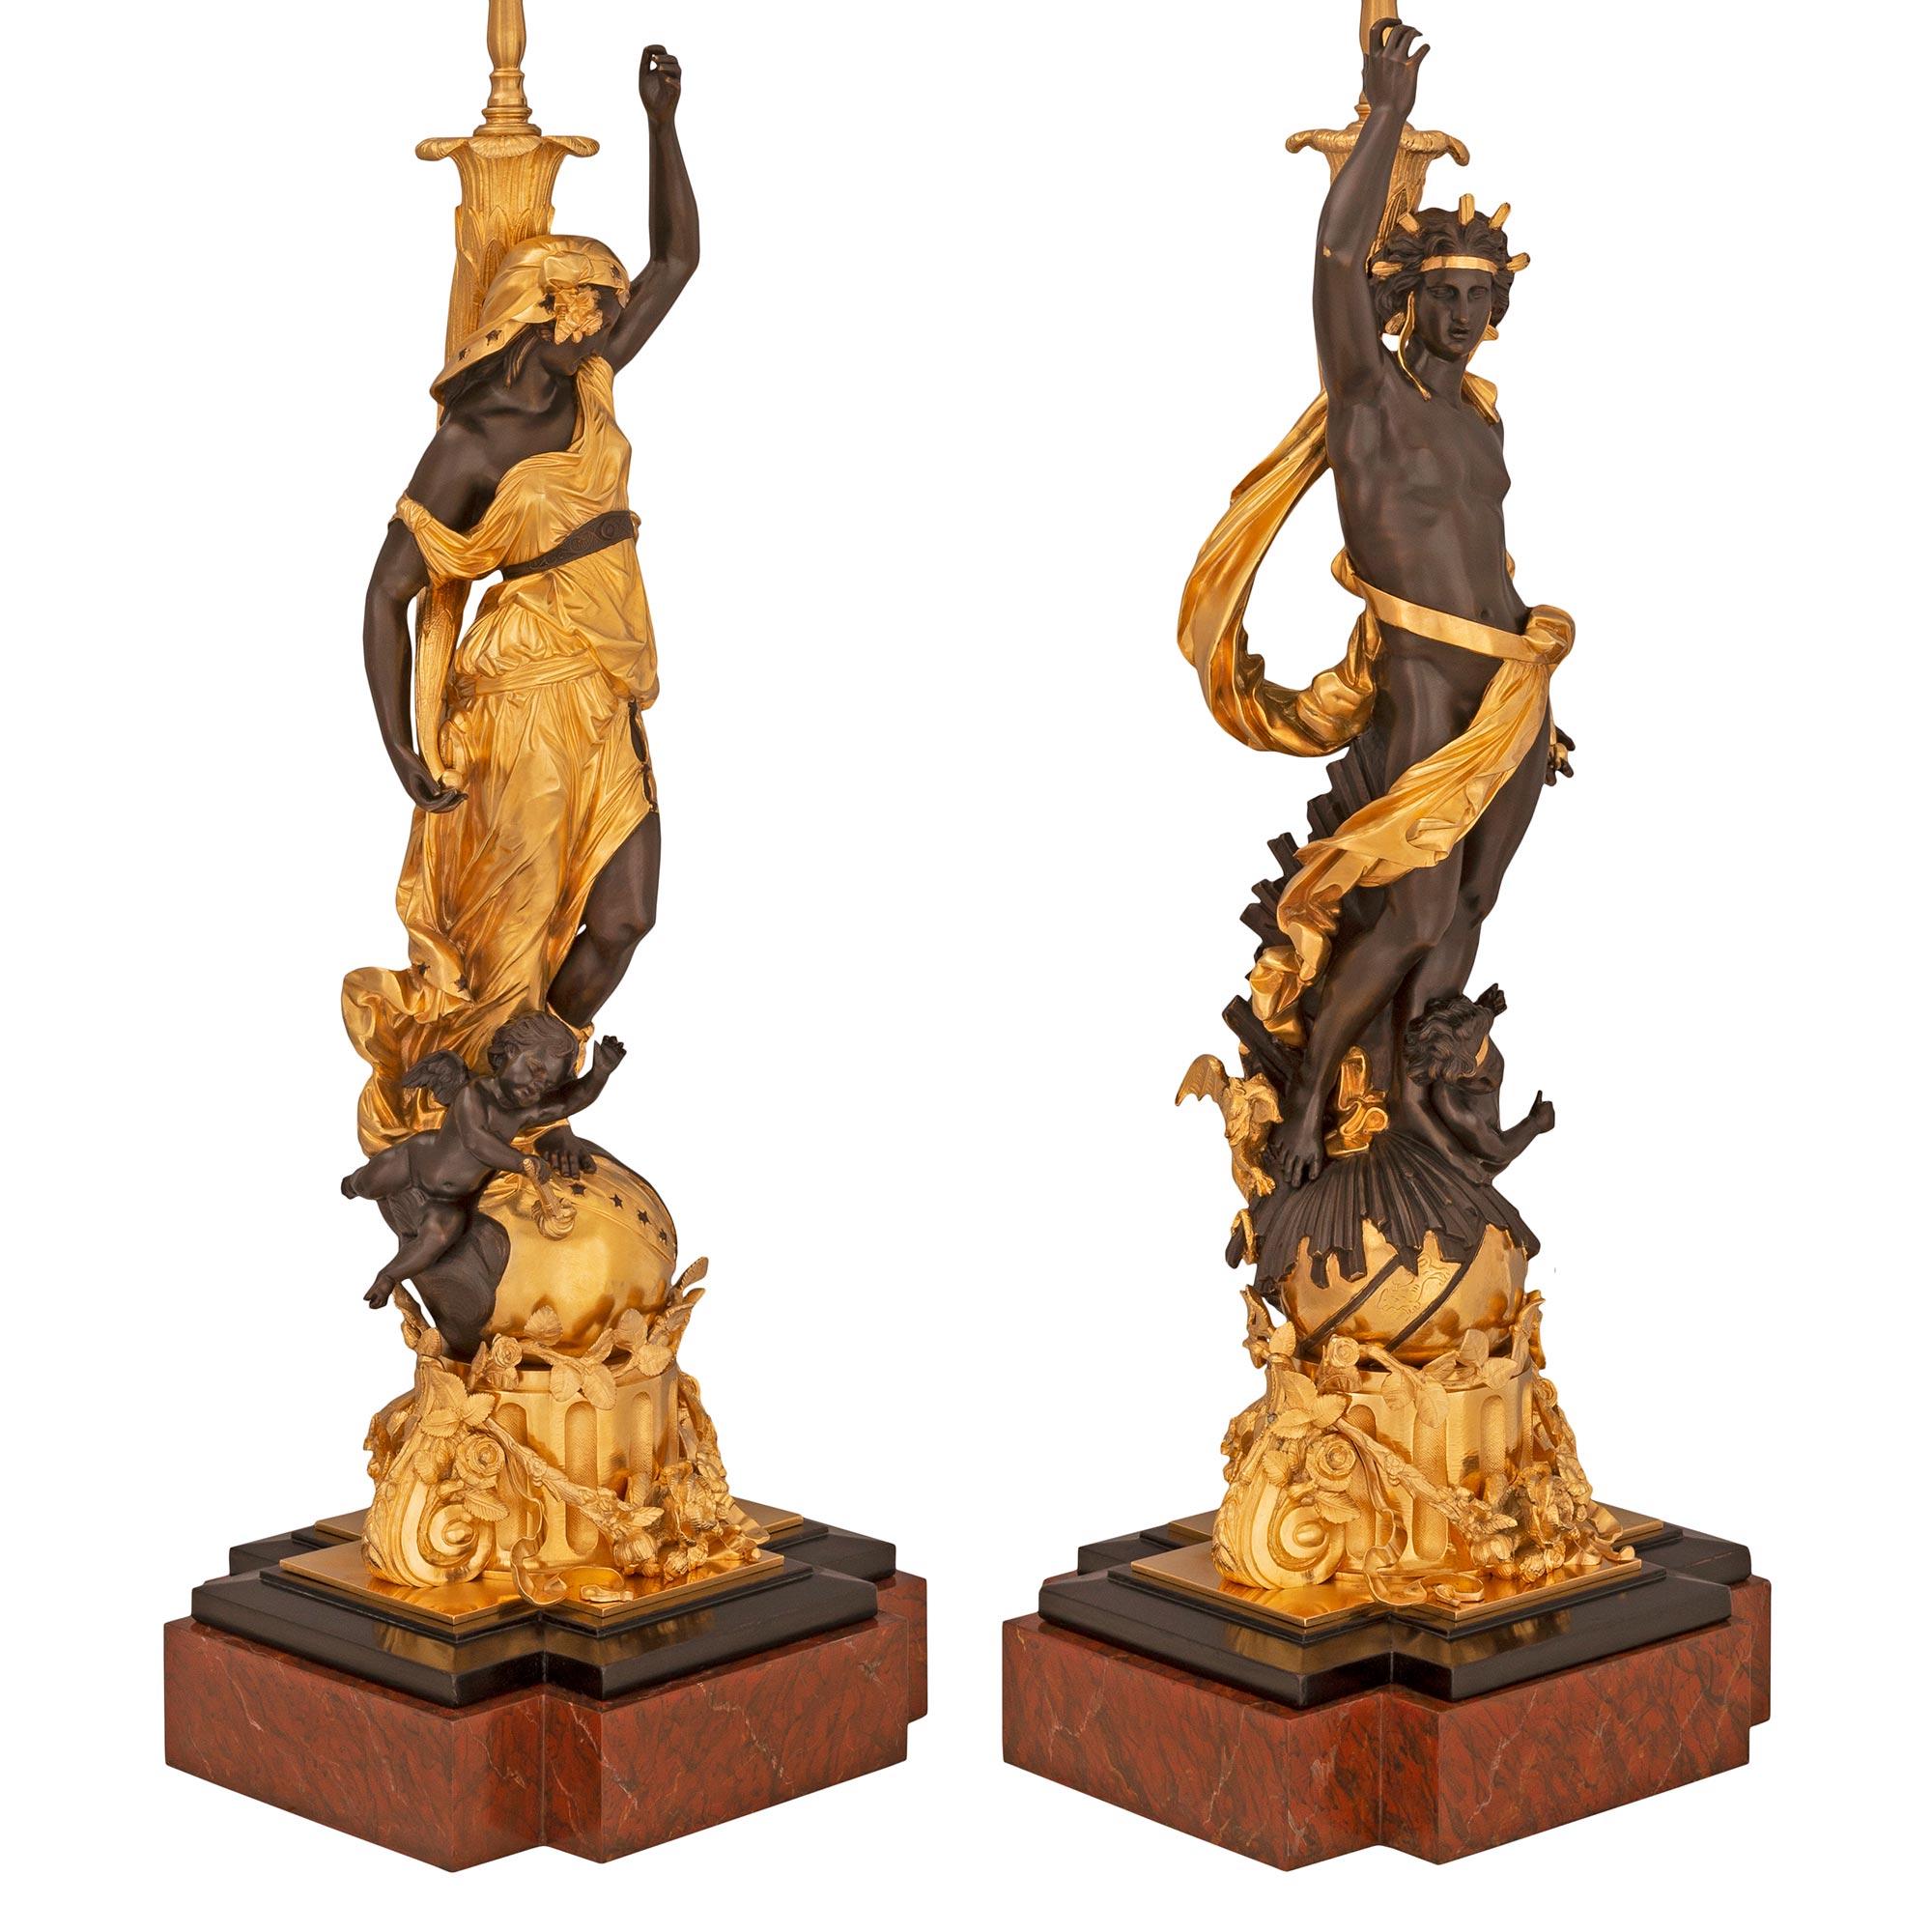 A stunning and extremely decorative true pair of French 19th century Louis XVI st. ormolu, patinated bronze, Rouge Griotte, and black Belgian marble lamps. Each lamp is raised by a handsome Rouge Griotte marble base with cut corners and a fine